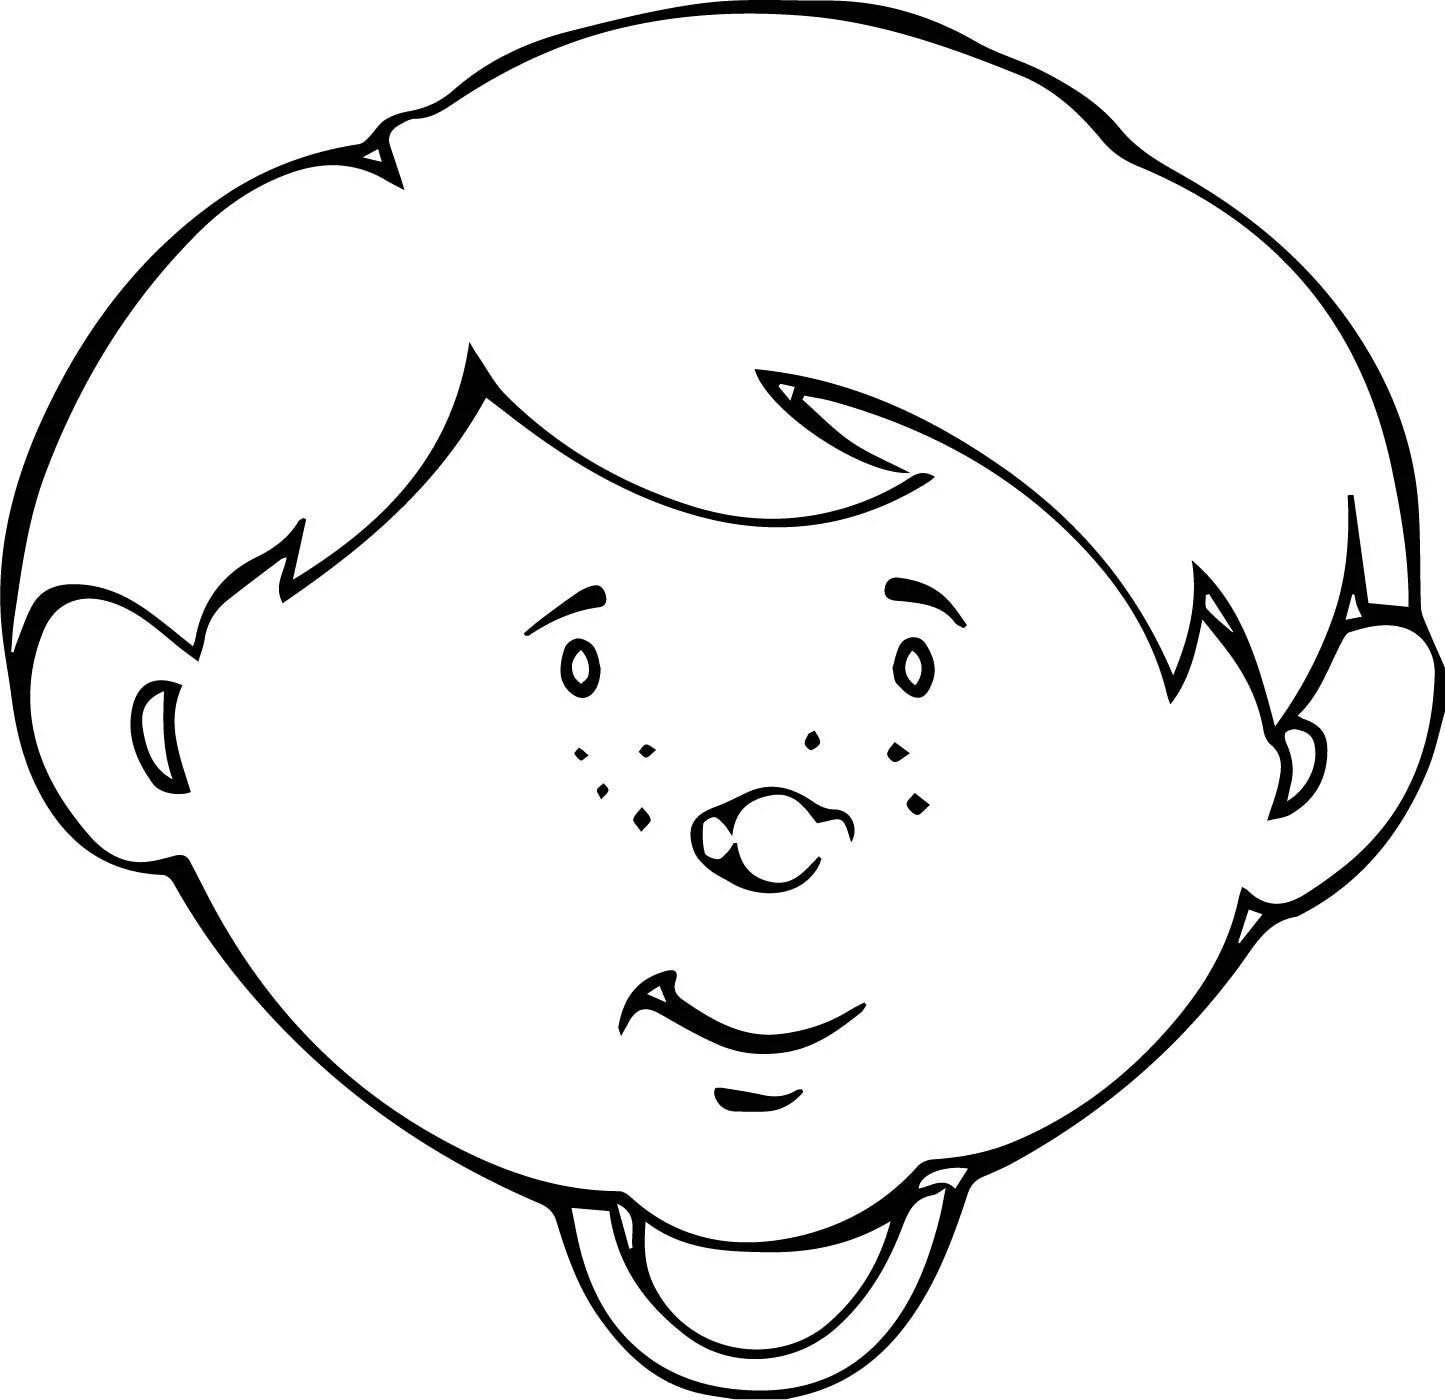 Exquisite baby face coloring page for kids